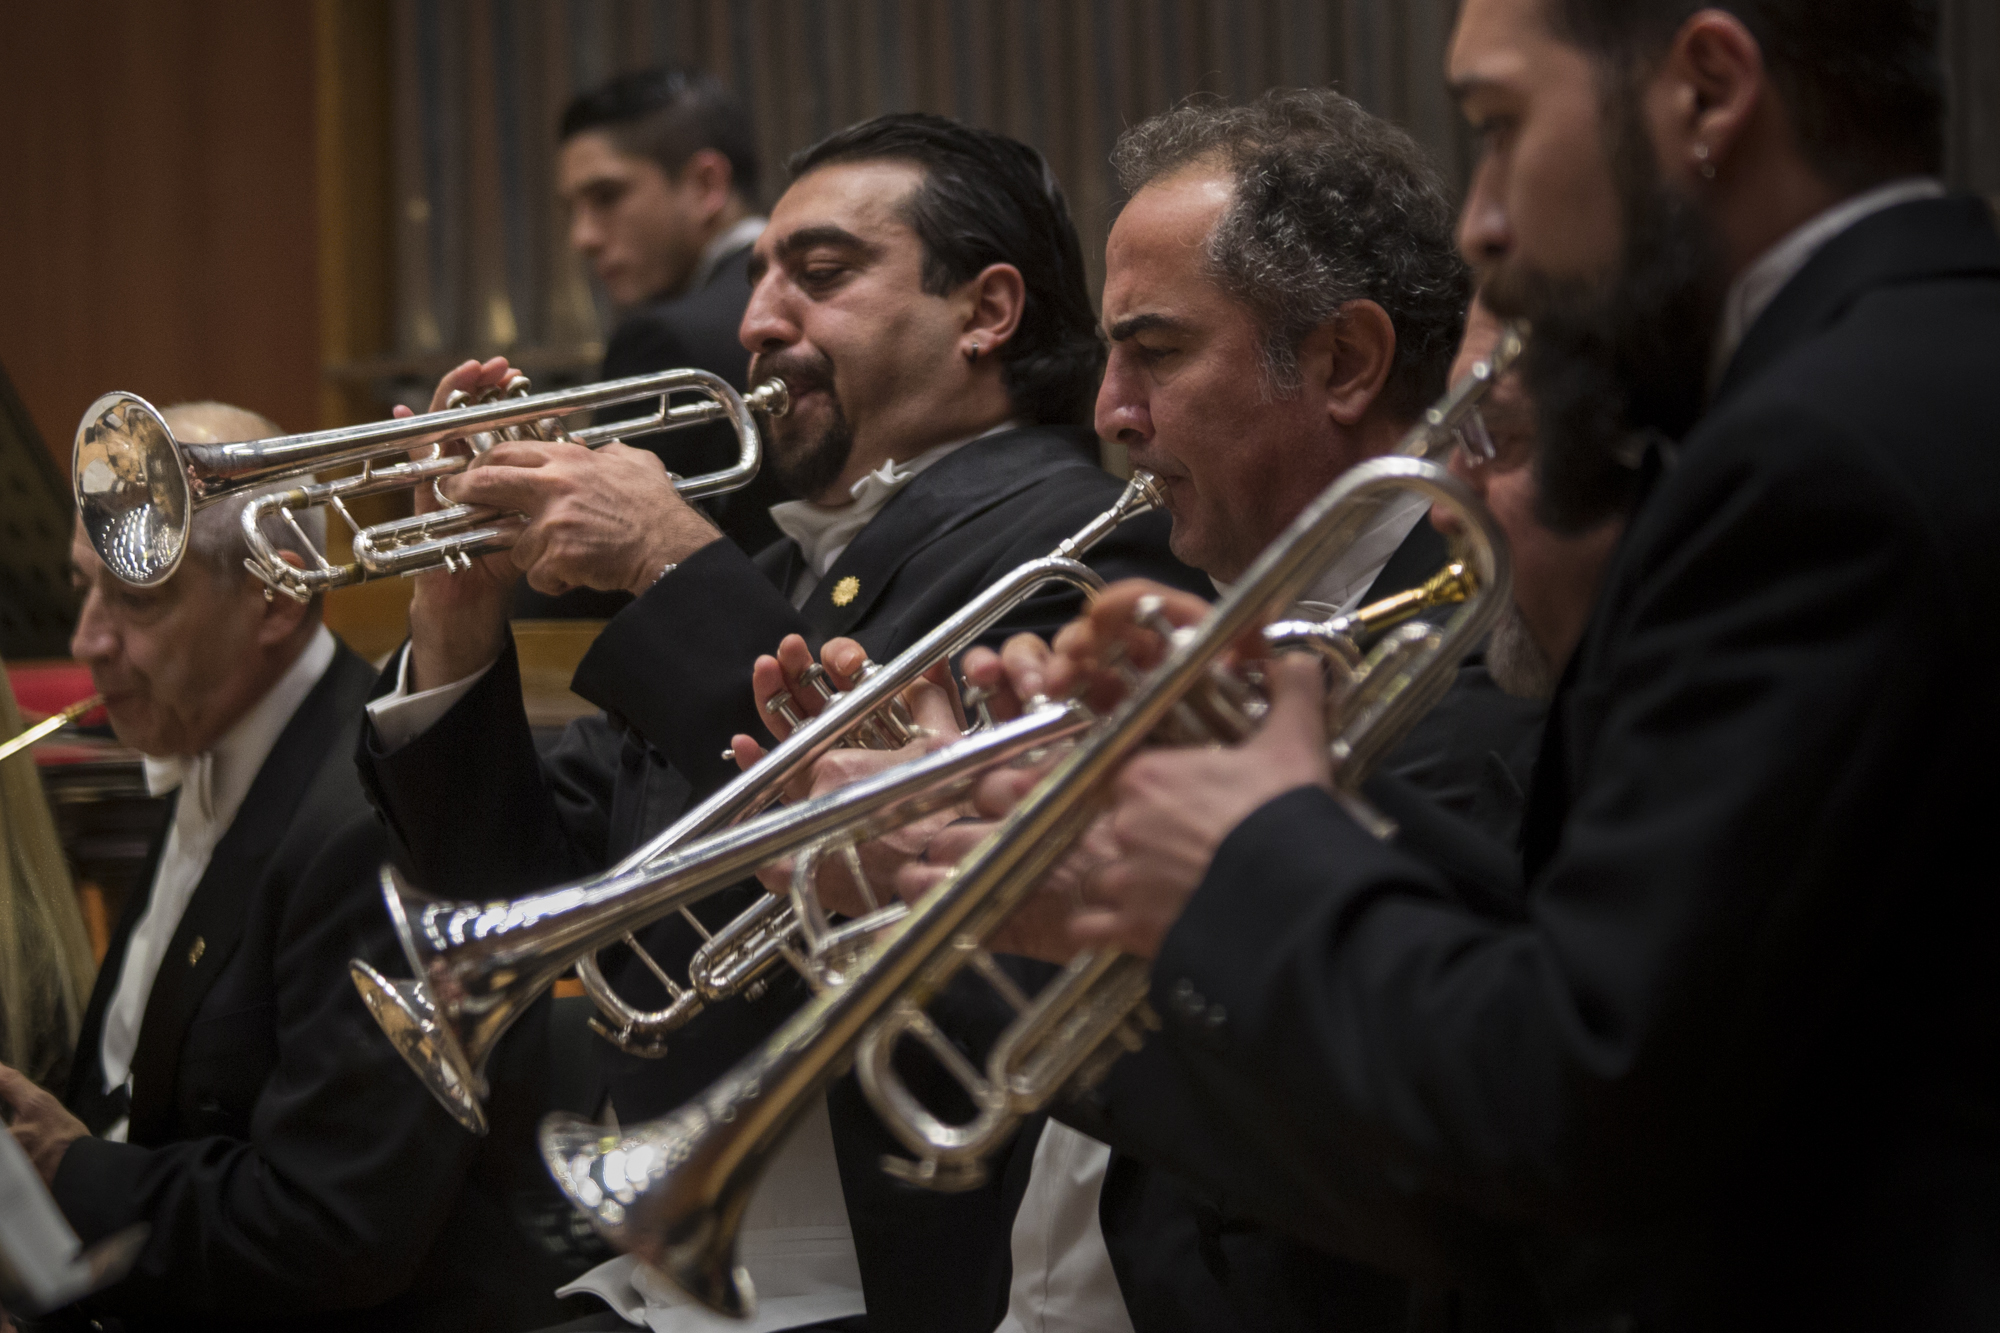  Cem a musician member of the CSO’s administrative team and fellow trumpeters perform during a weekly concert. Many of the CSO musicians have multiple jobs for financial reasons. Ankara, 18th of December 2014. 